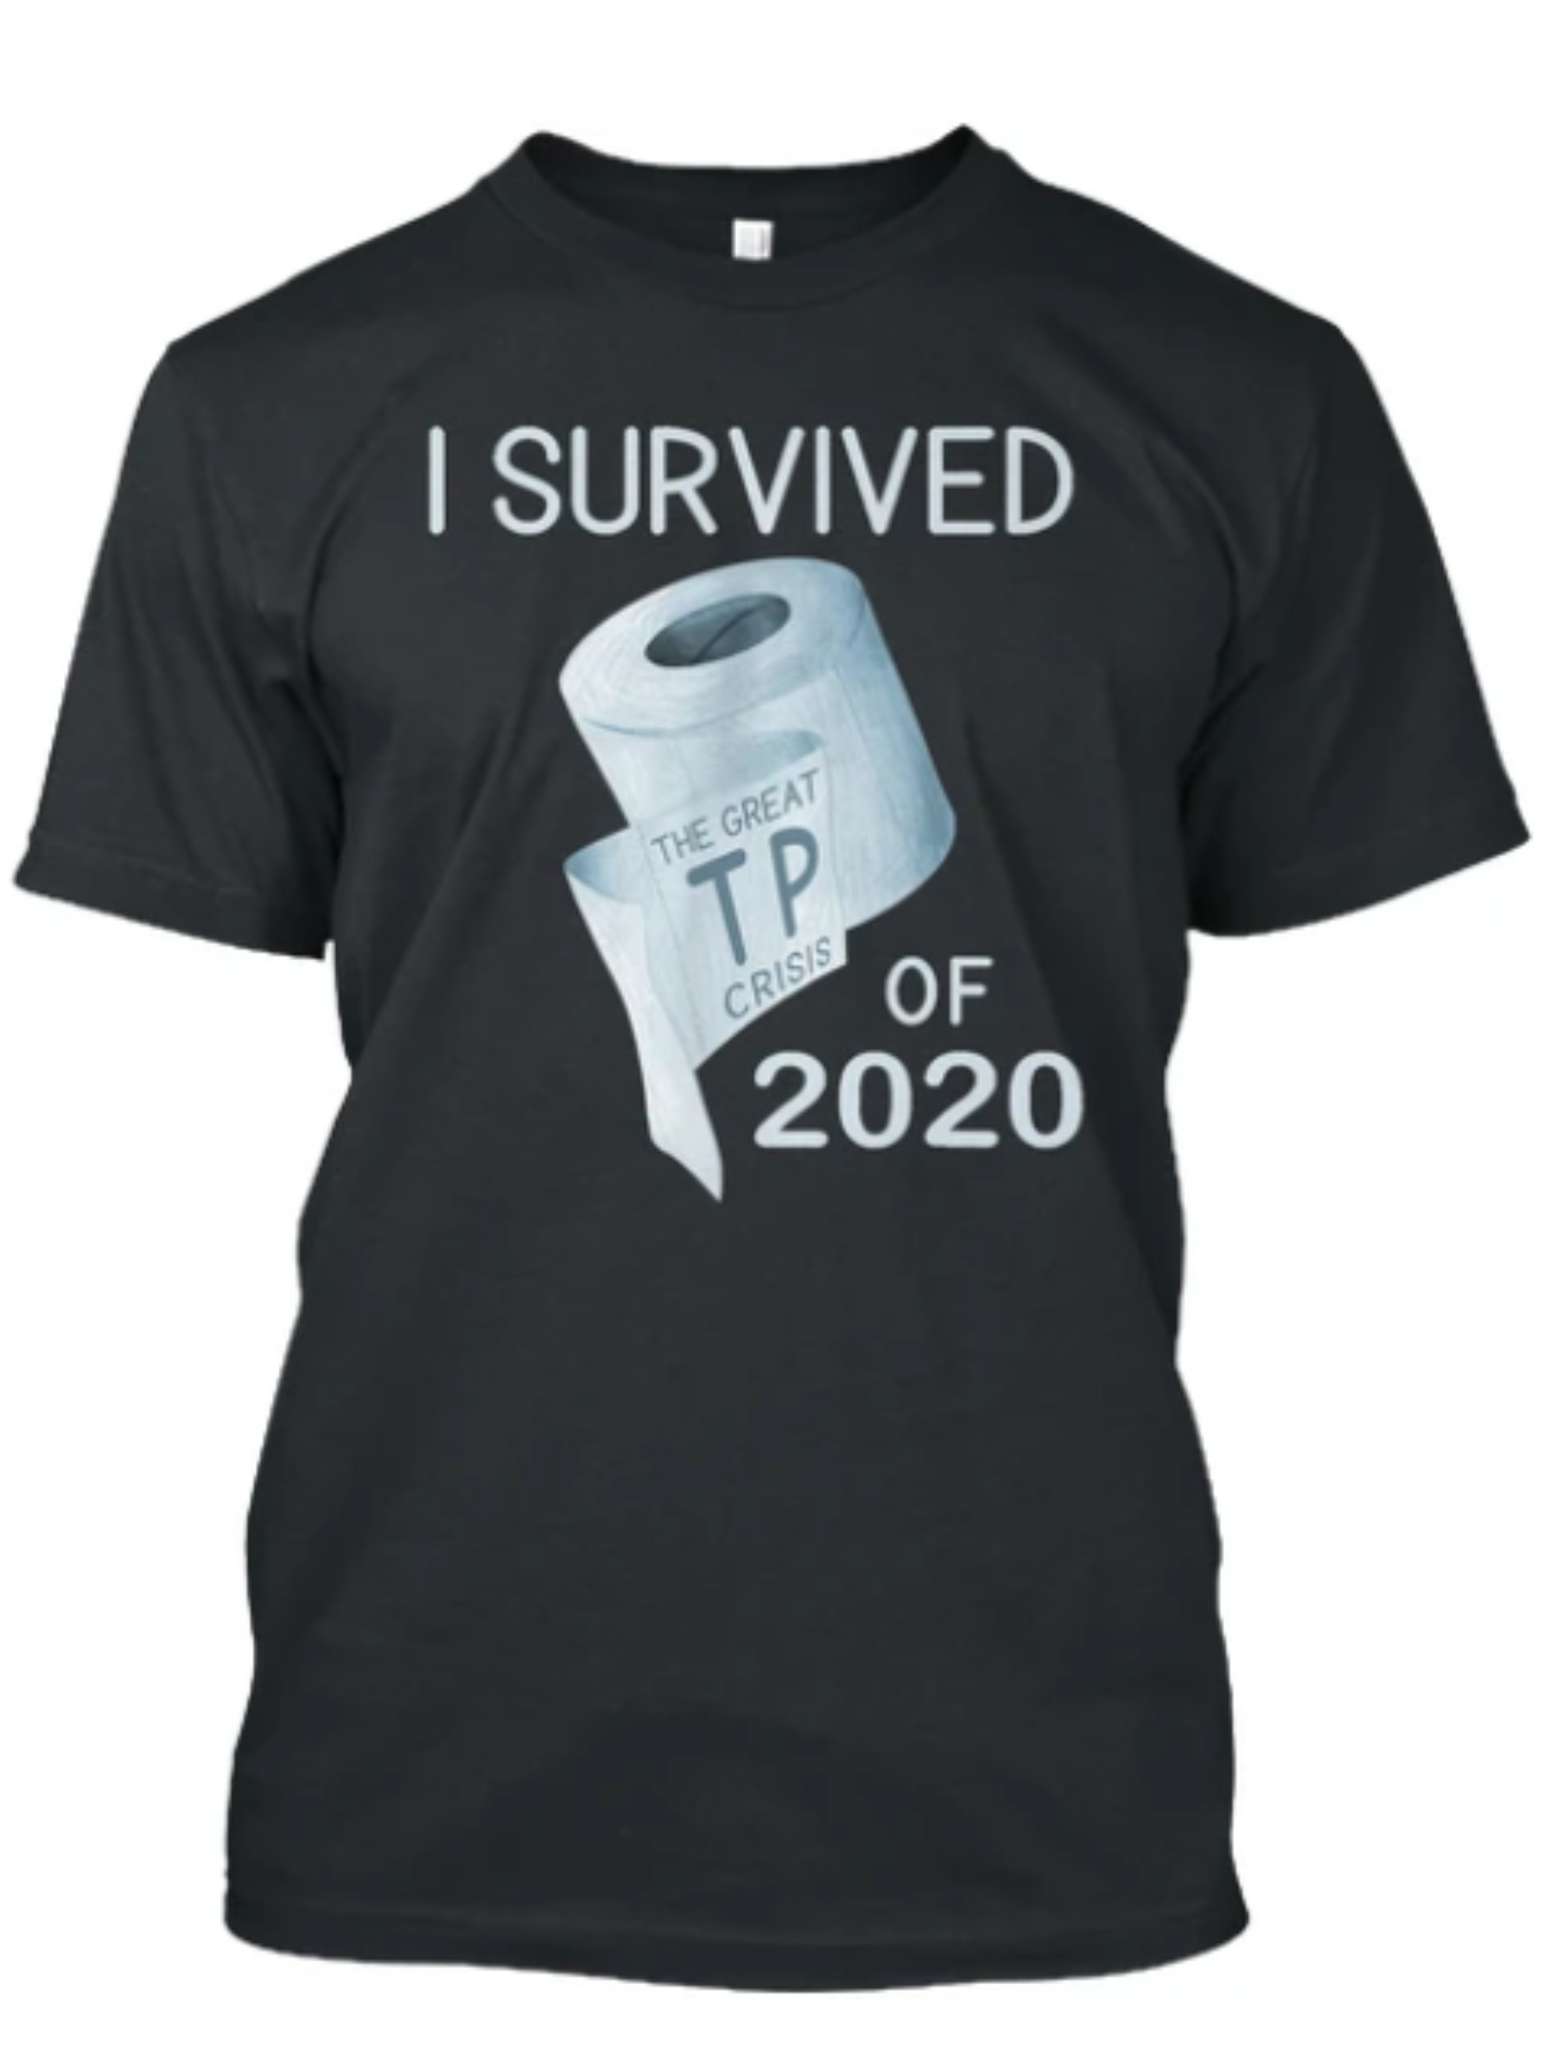 I survived the great tp crisis of 2020